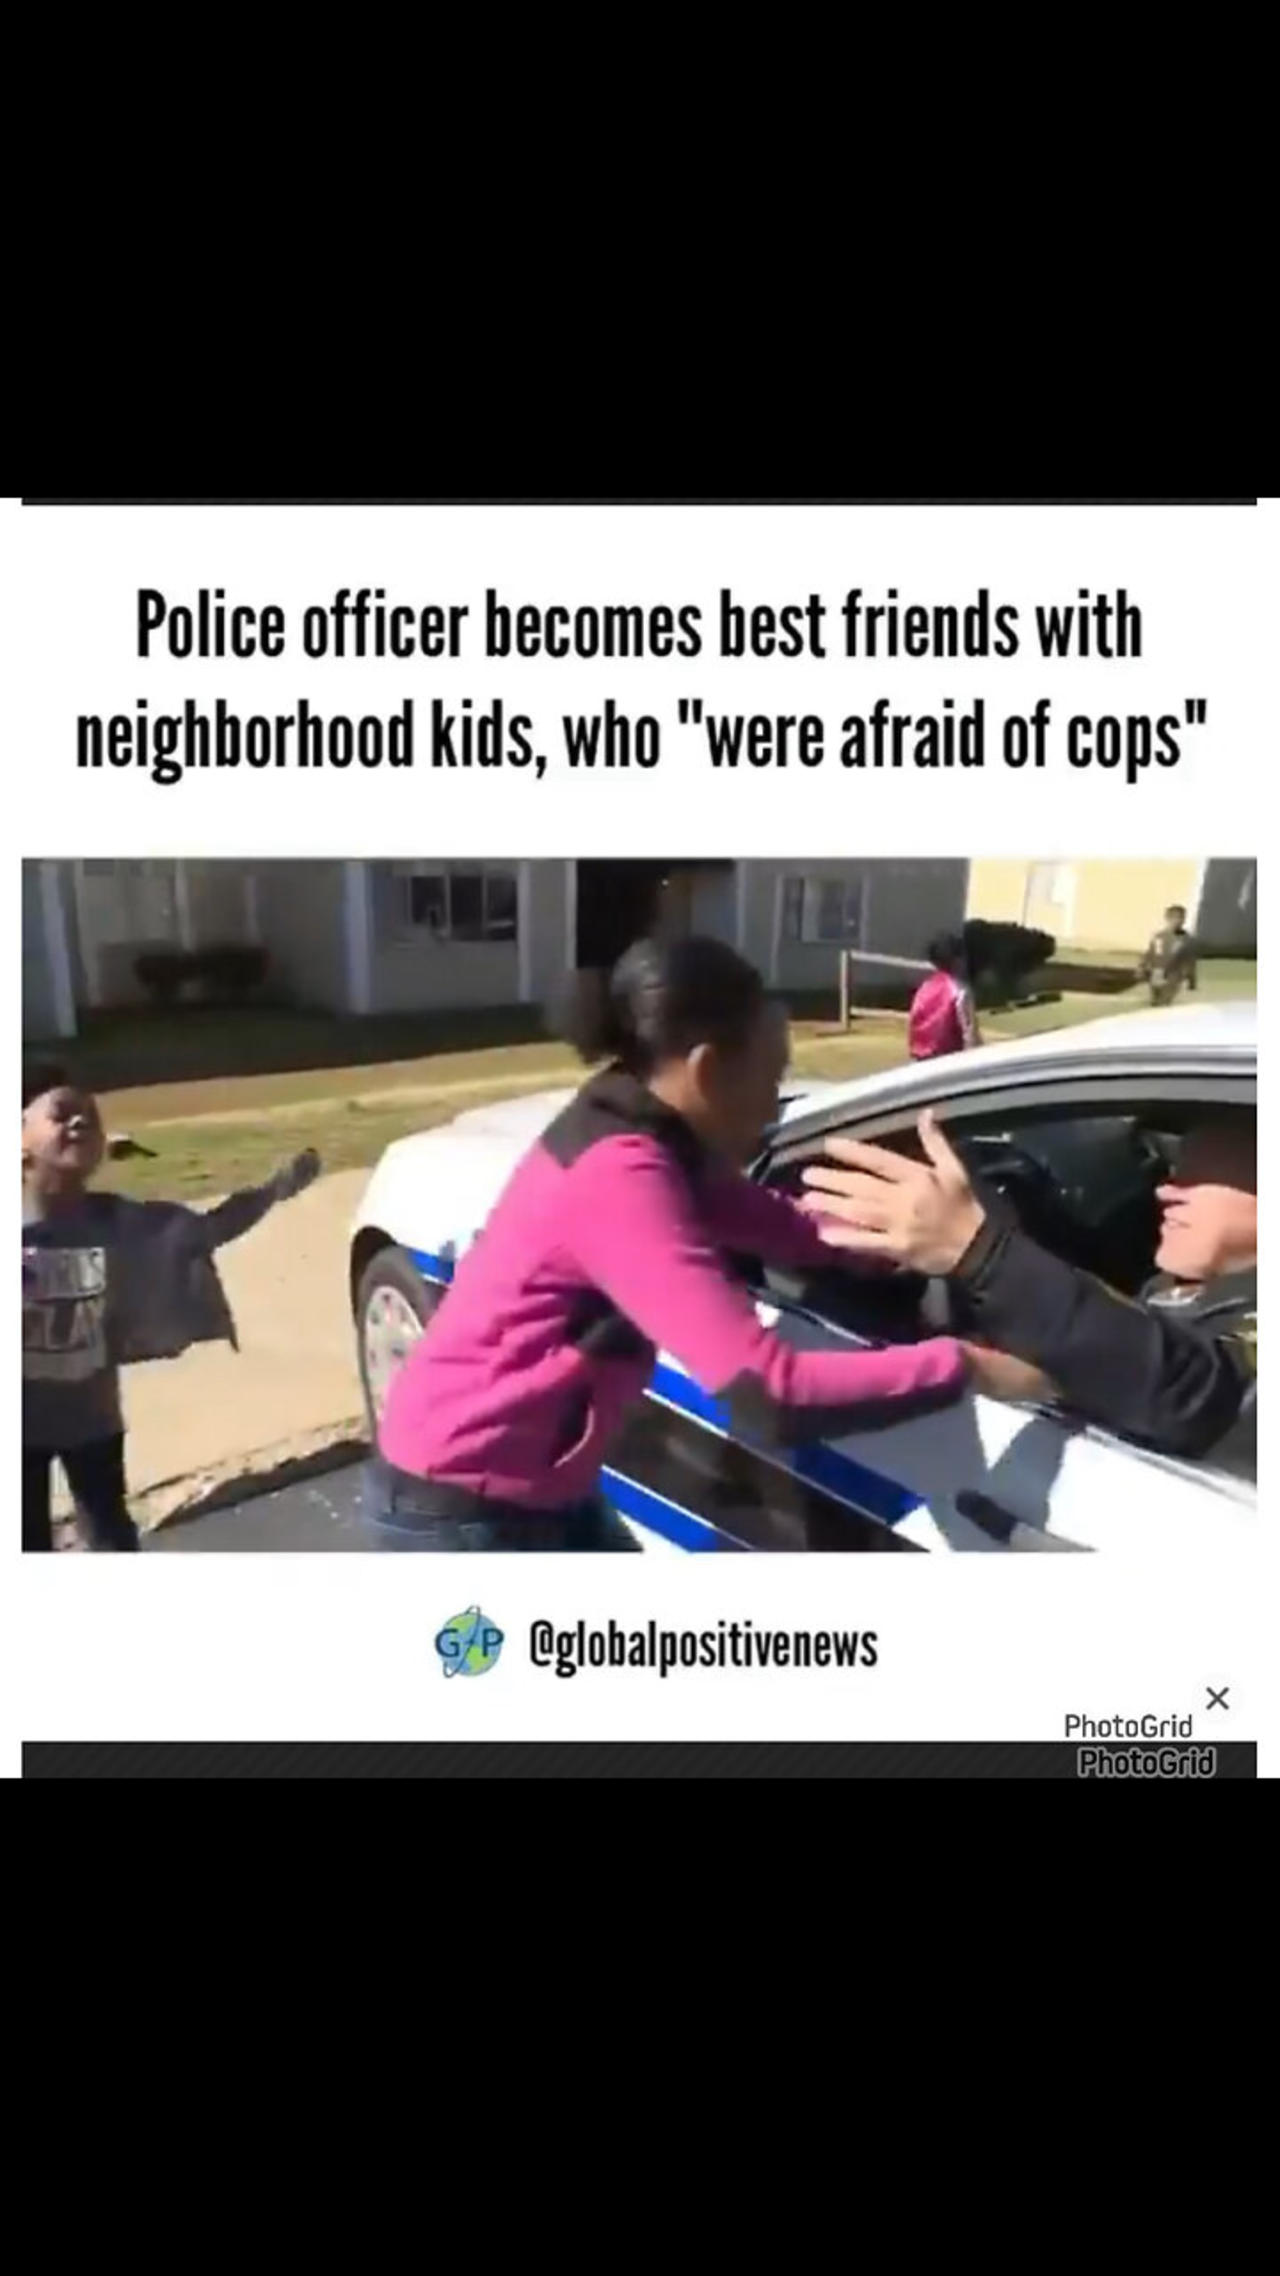 Police officers becomes best friends with neighborhood kids